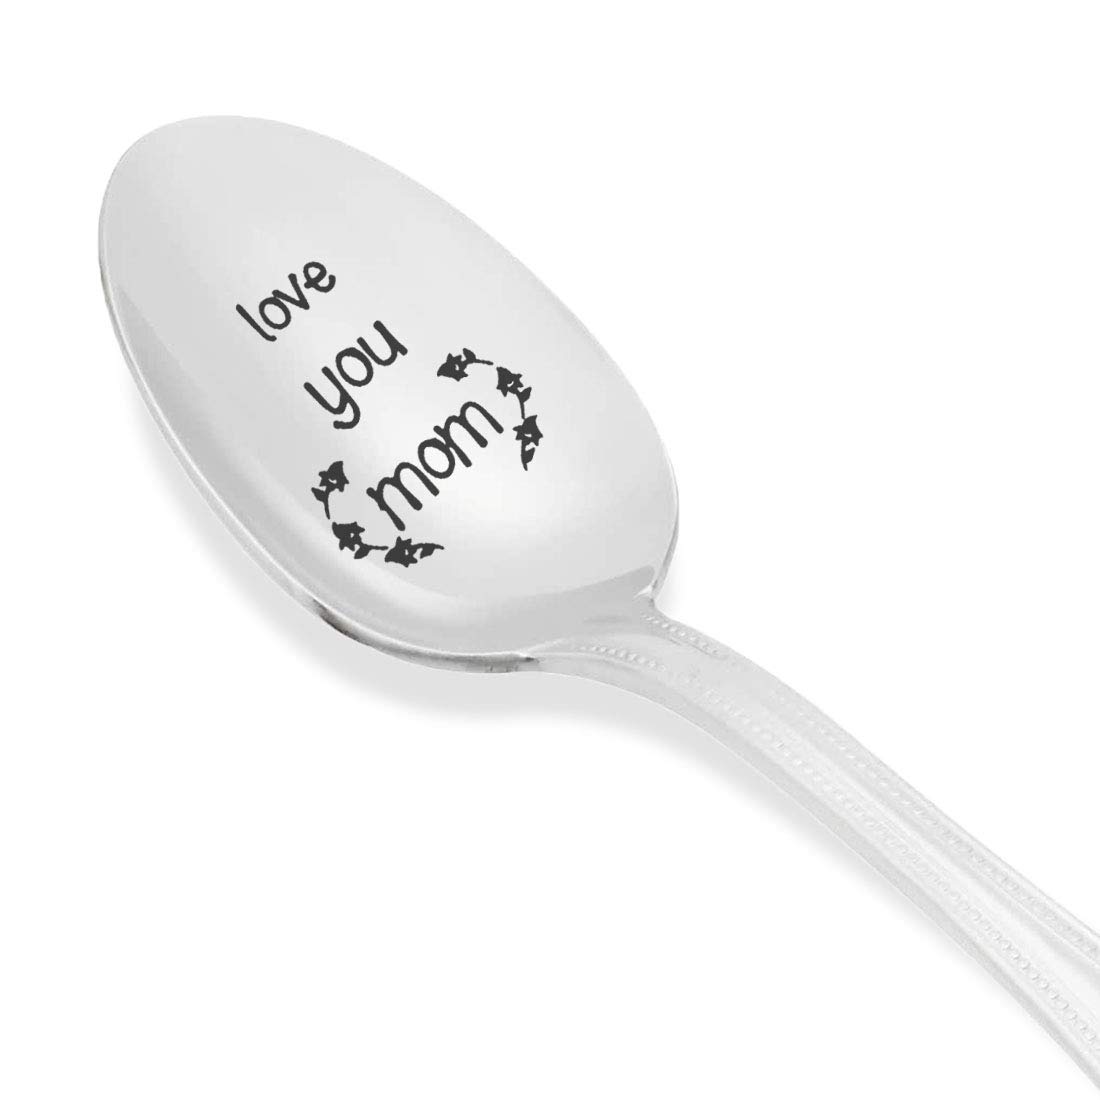 Love You Mom - gifts for mom - birthday gifts for women - Coffee Spoon mom Gift - Engraved Spoon - stainless steel - Birthday gifts - Mothers day gifts - Spoon Gift By Boston Creative company#SP_041